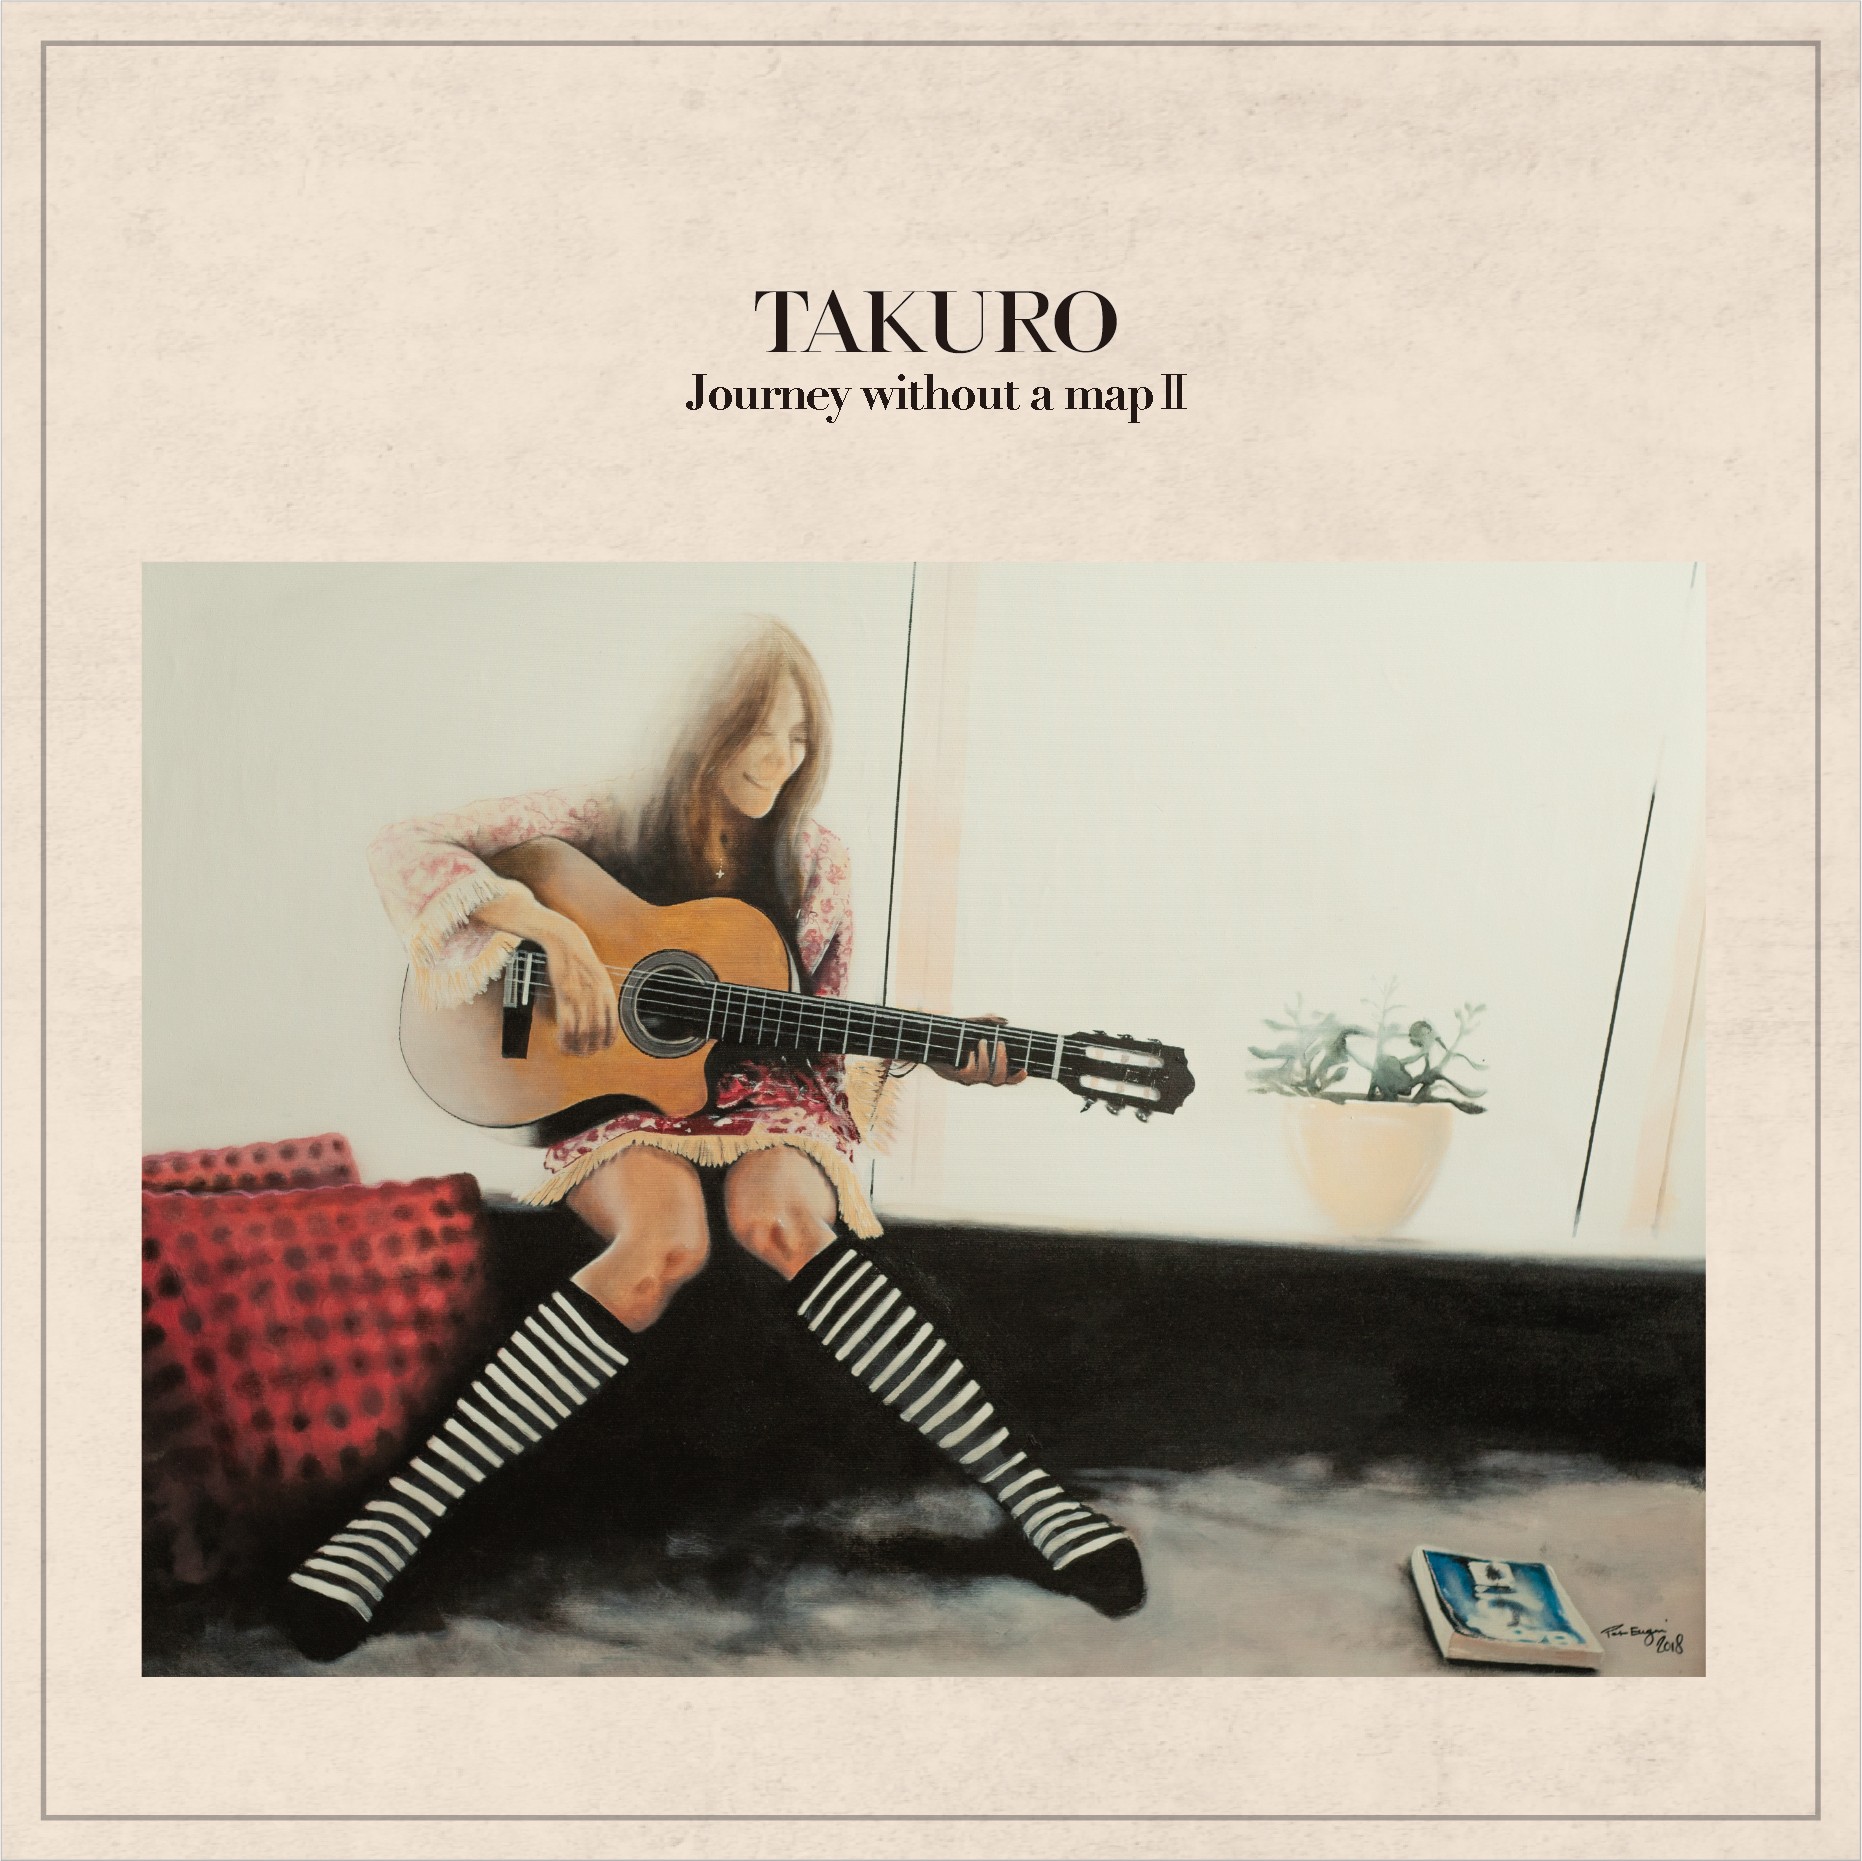 TAKURO – Journey without a map II [FLAC + MP3 VBR / CD] [2019.02.27]